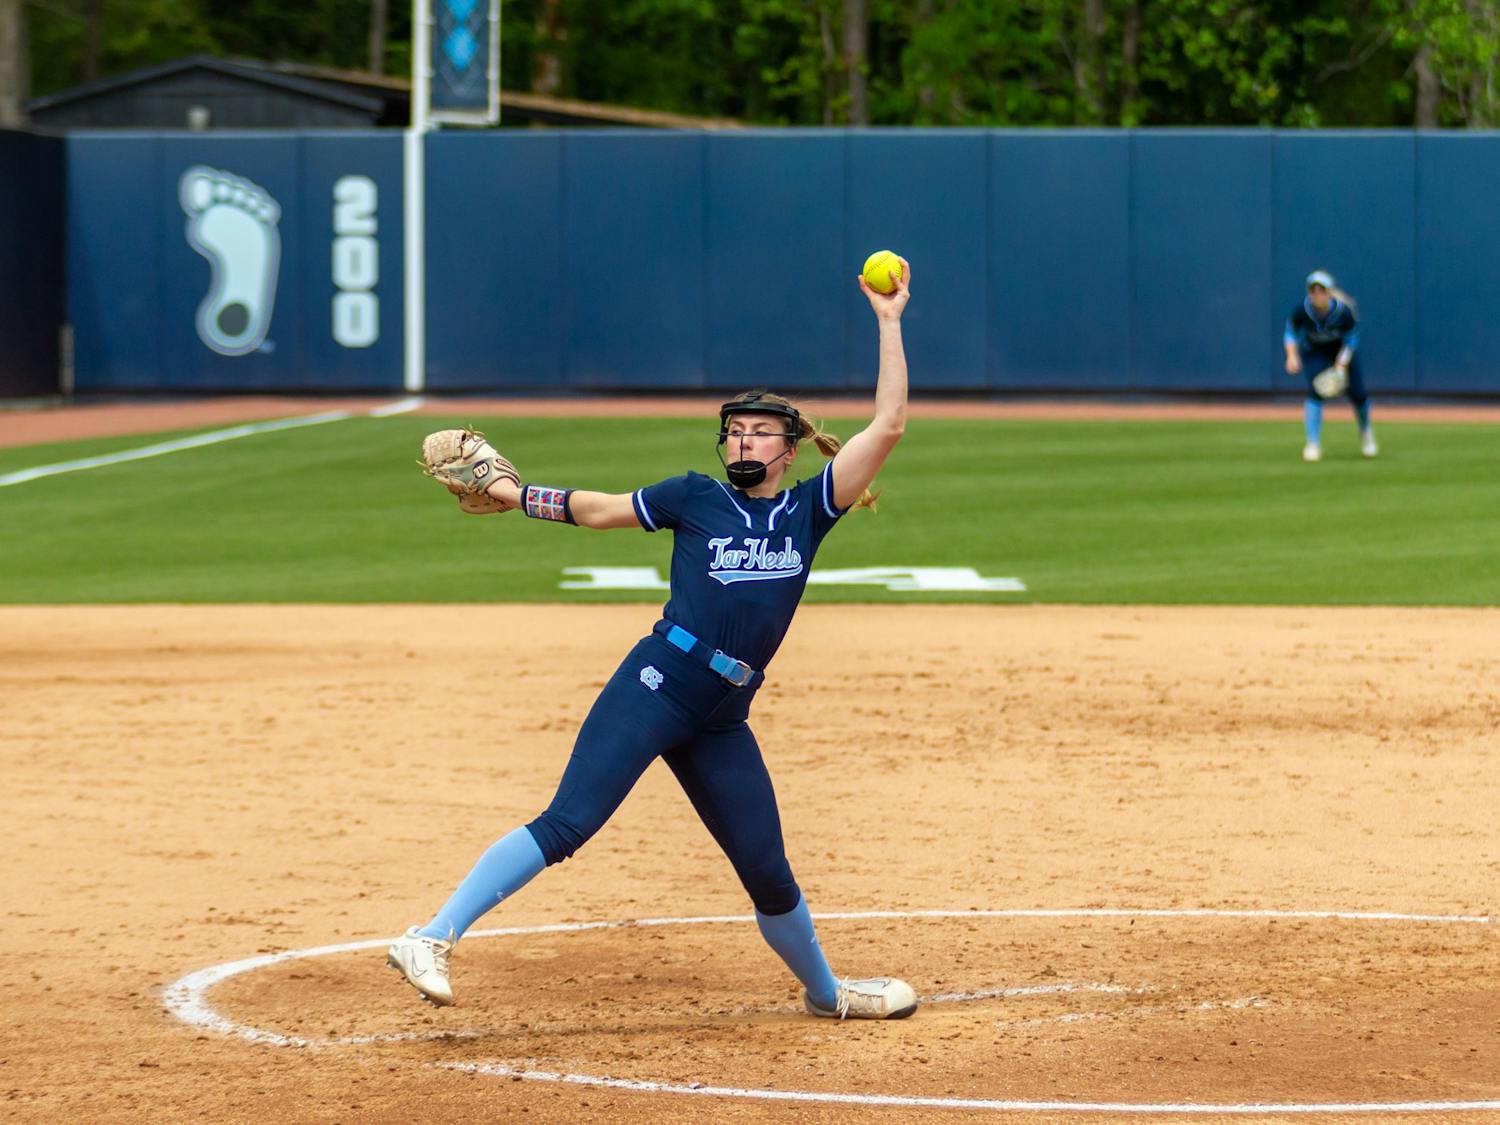 UNC freshman pitcher Lilli Backes (99) pitches the ball during the softball game against Florida State at Anderson Stadium on Saturday, April 16, 2022. UNC won 5-1.